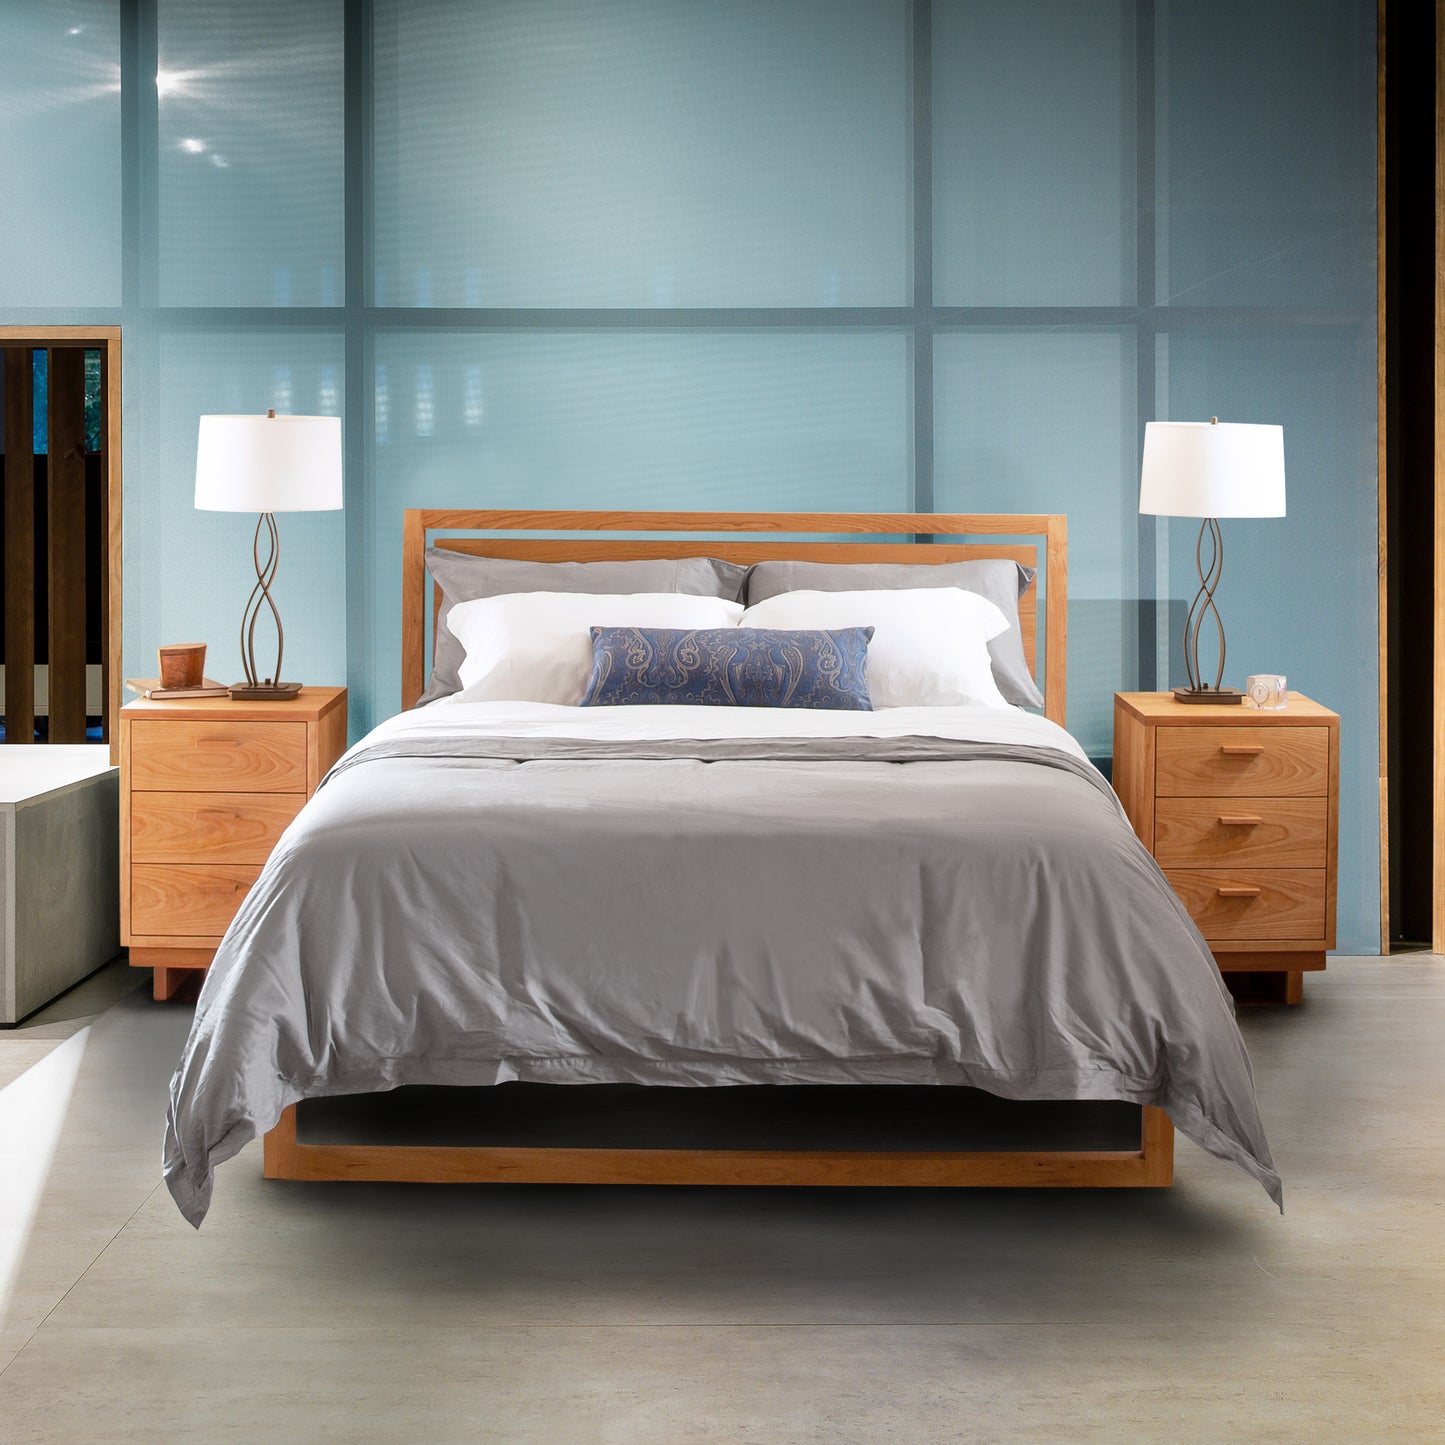 A neatly made Vermont Furniture Designs Pendant Bed with white and gray bedding, flanked by two wooden nightstands with matching lamps, set against a blue glass background.